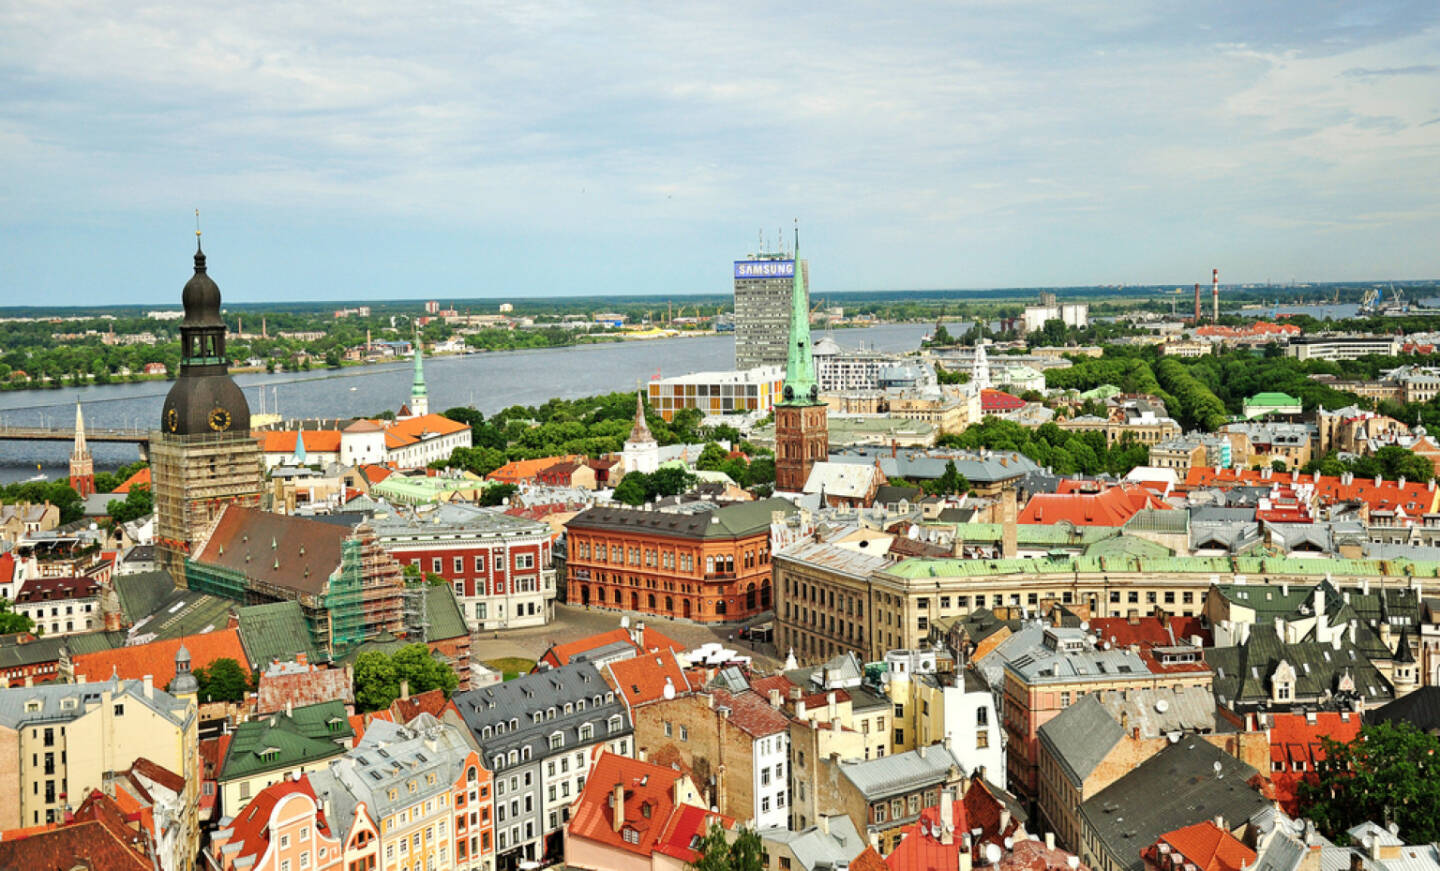 Riga, Lettland - http://www.shutterstock.com/de/pic-172968023/stock-photo-top-view-of-the-city-of-riga-and-the-river-daugava.html (Bild: www.shutterstock.com)